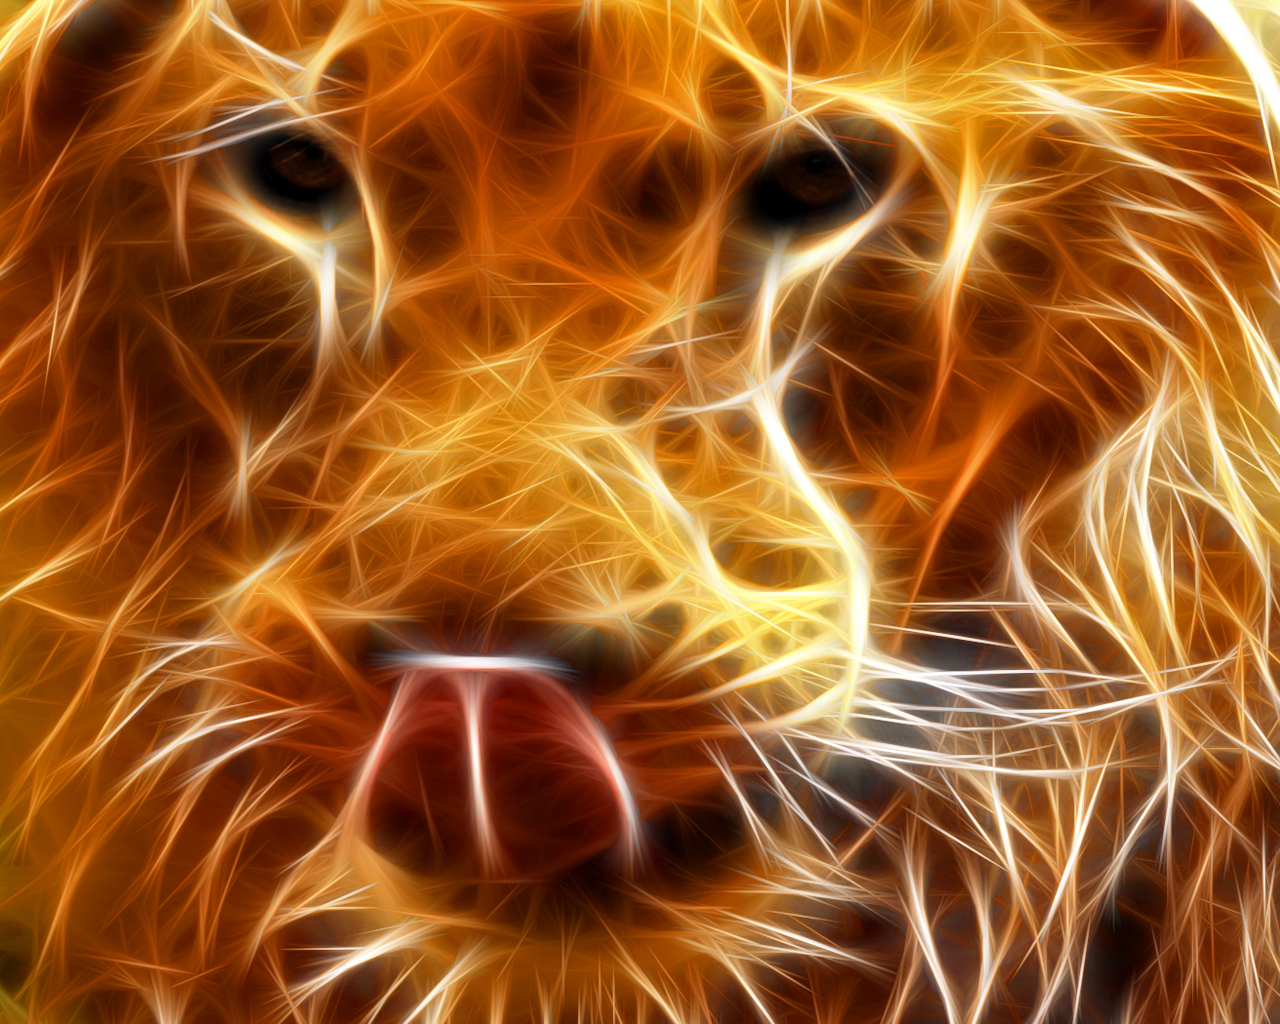 Wallpaper Lions Lion Without Payment And